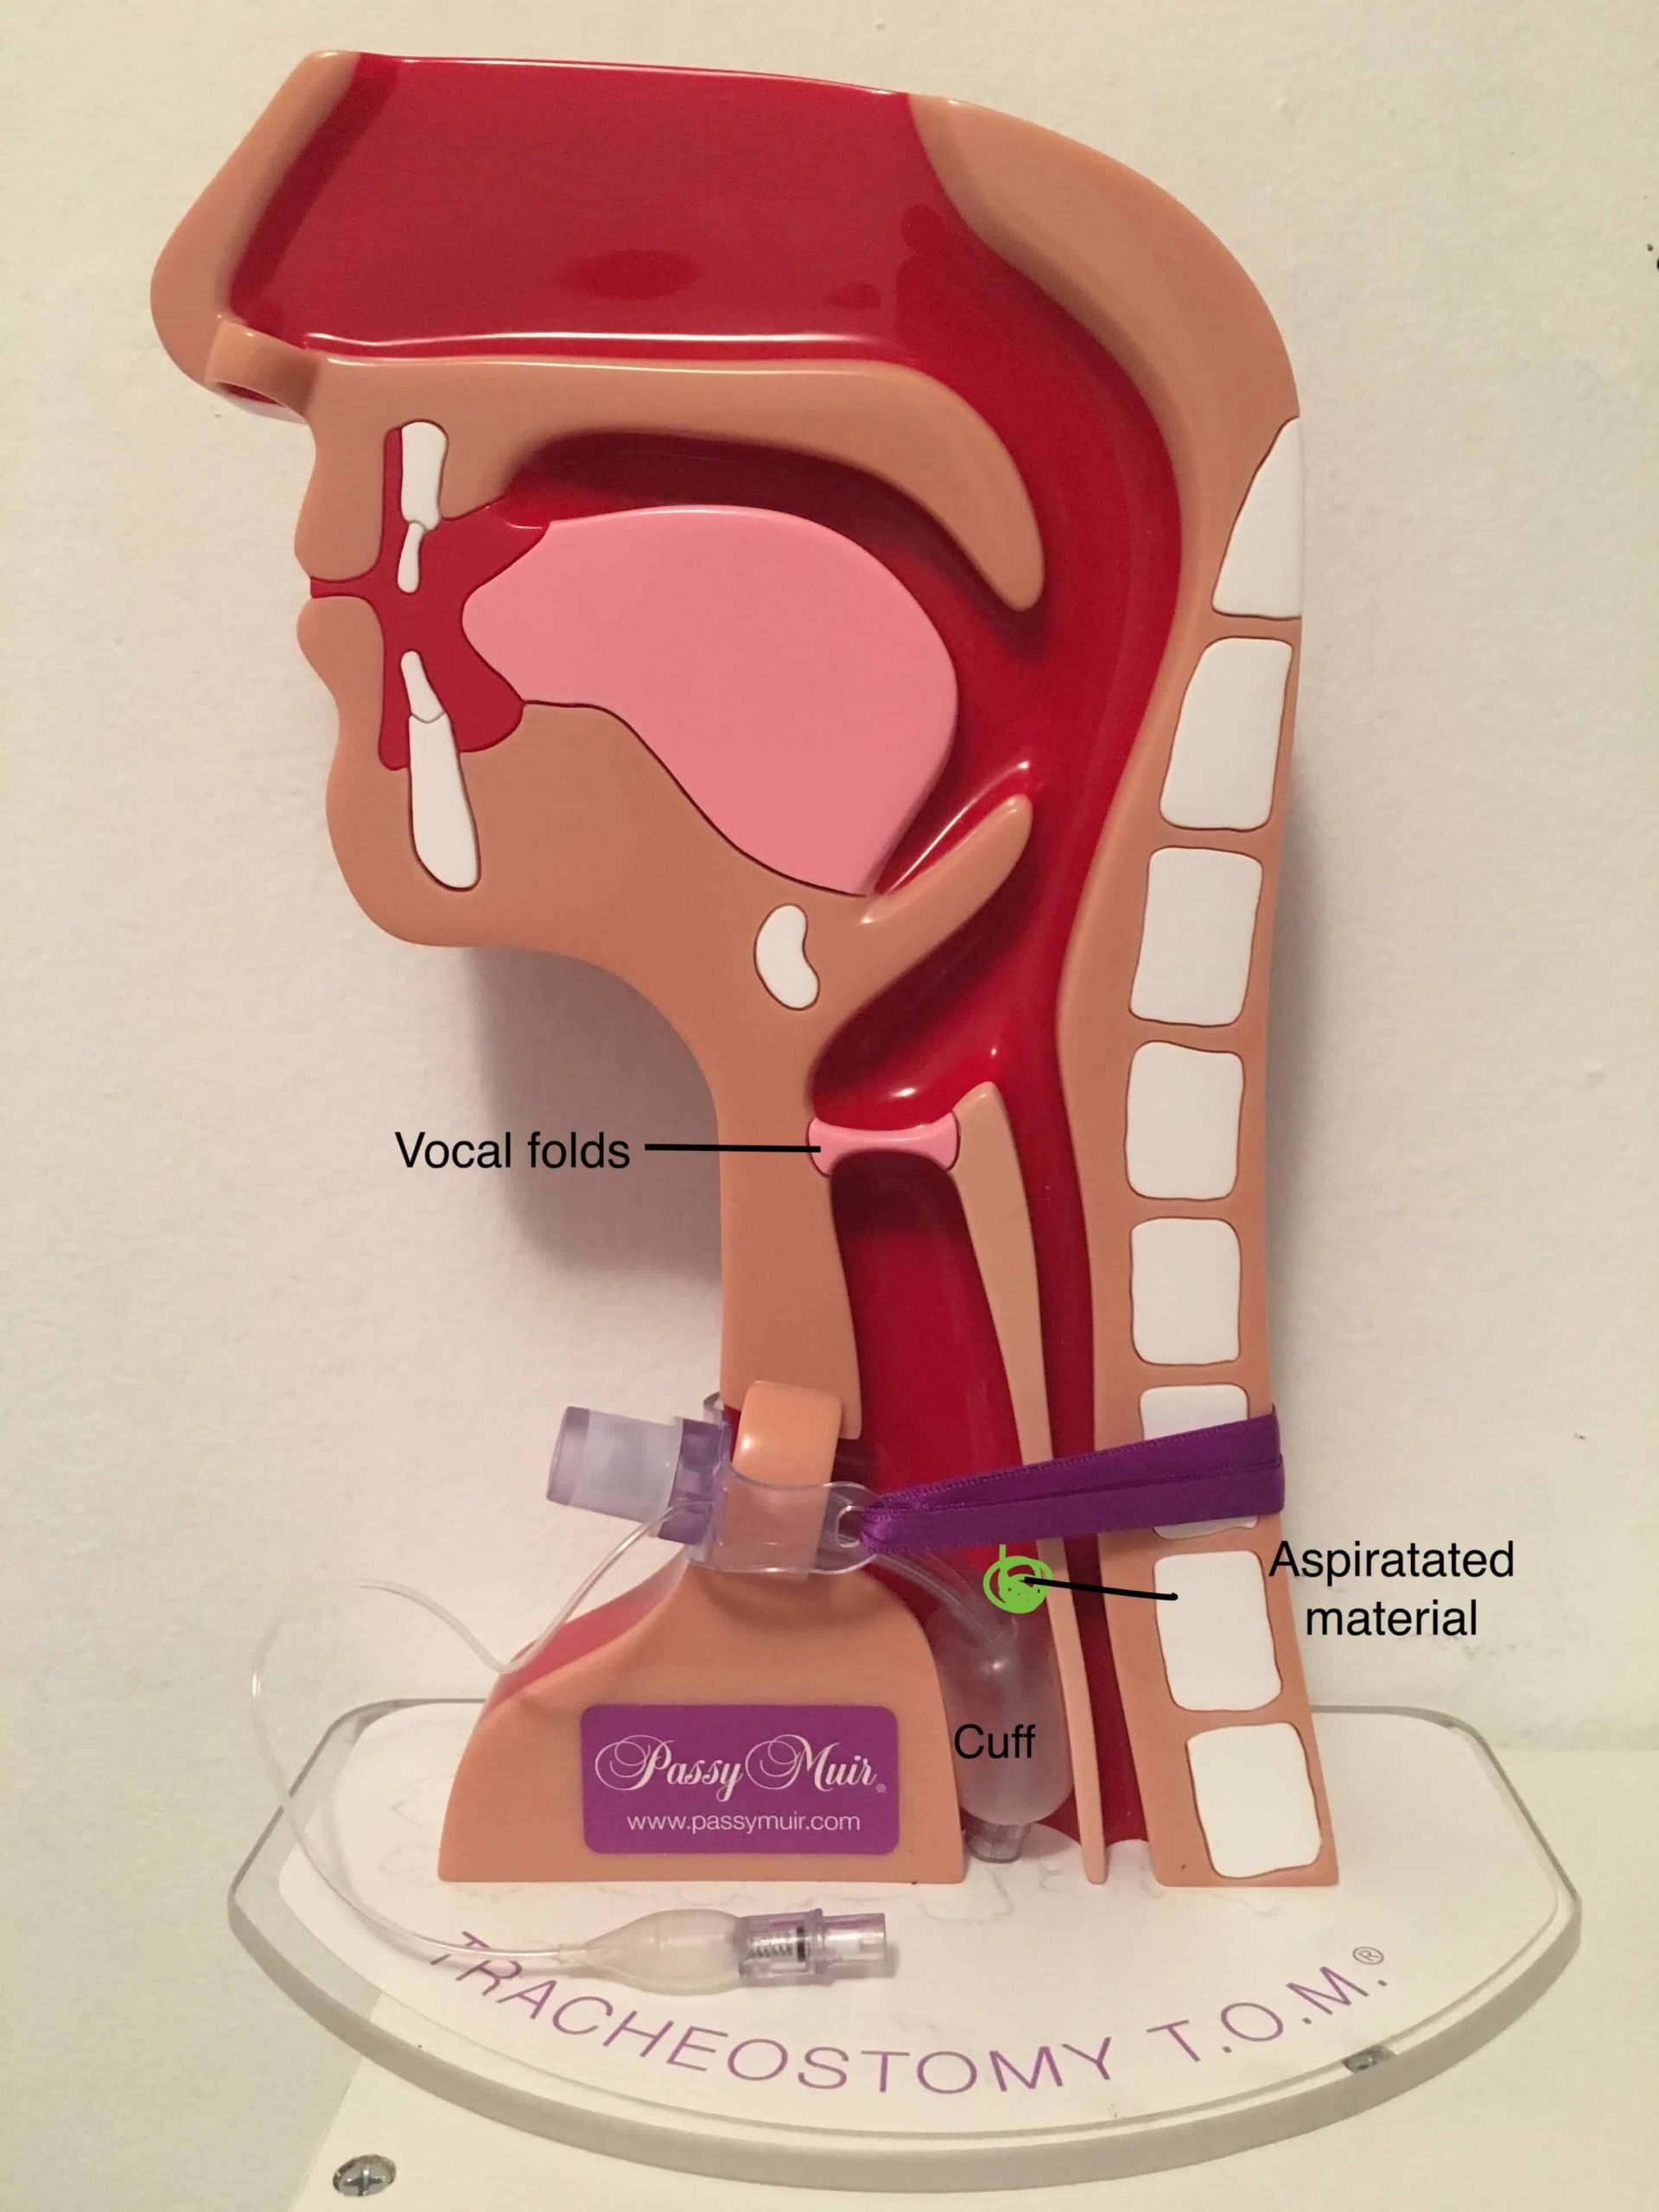 aspiration trach image scaled